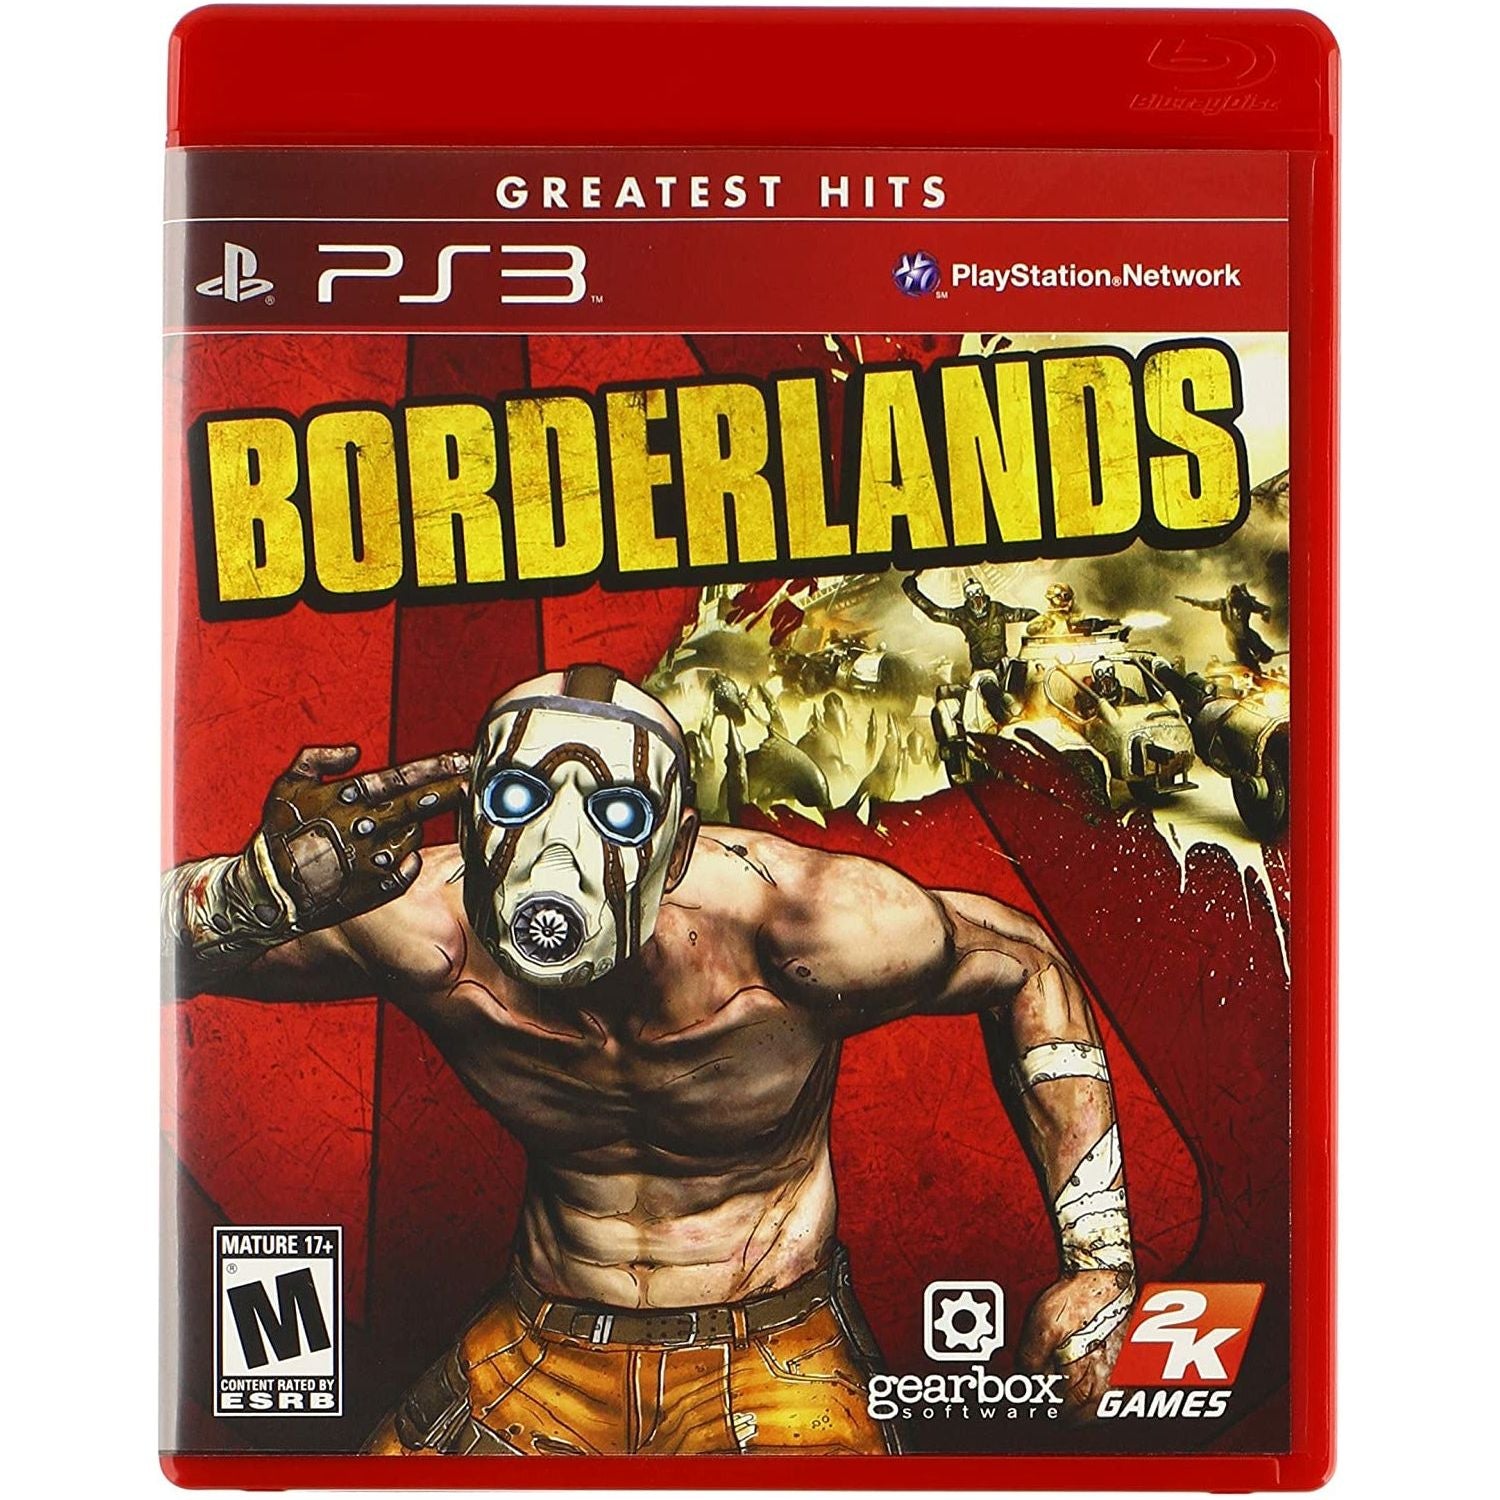 PS3 - Borderlands (Greatest Hits)